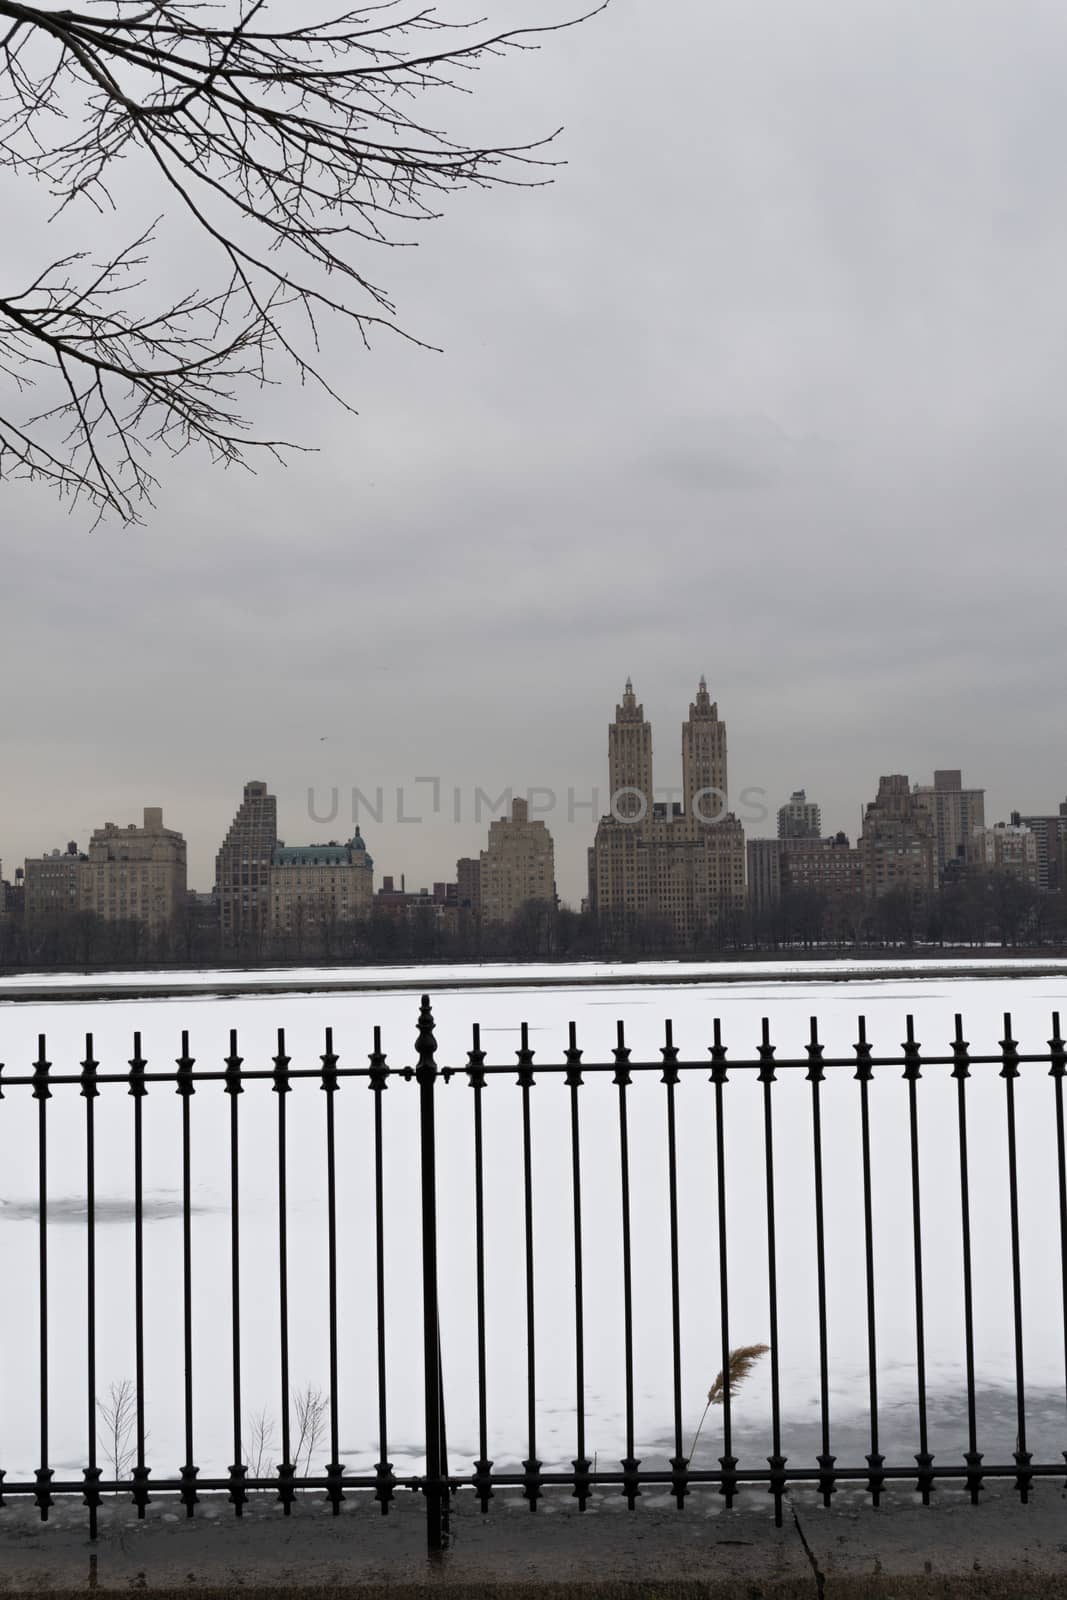 The Jaqueline Kenedy Onassis Reservoir is the biggest pond in Central Park and the views of the Upper West Side are a classic